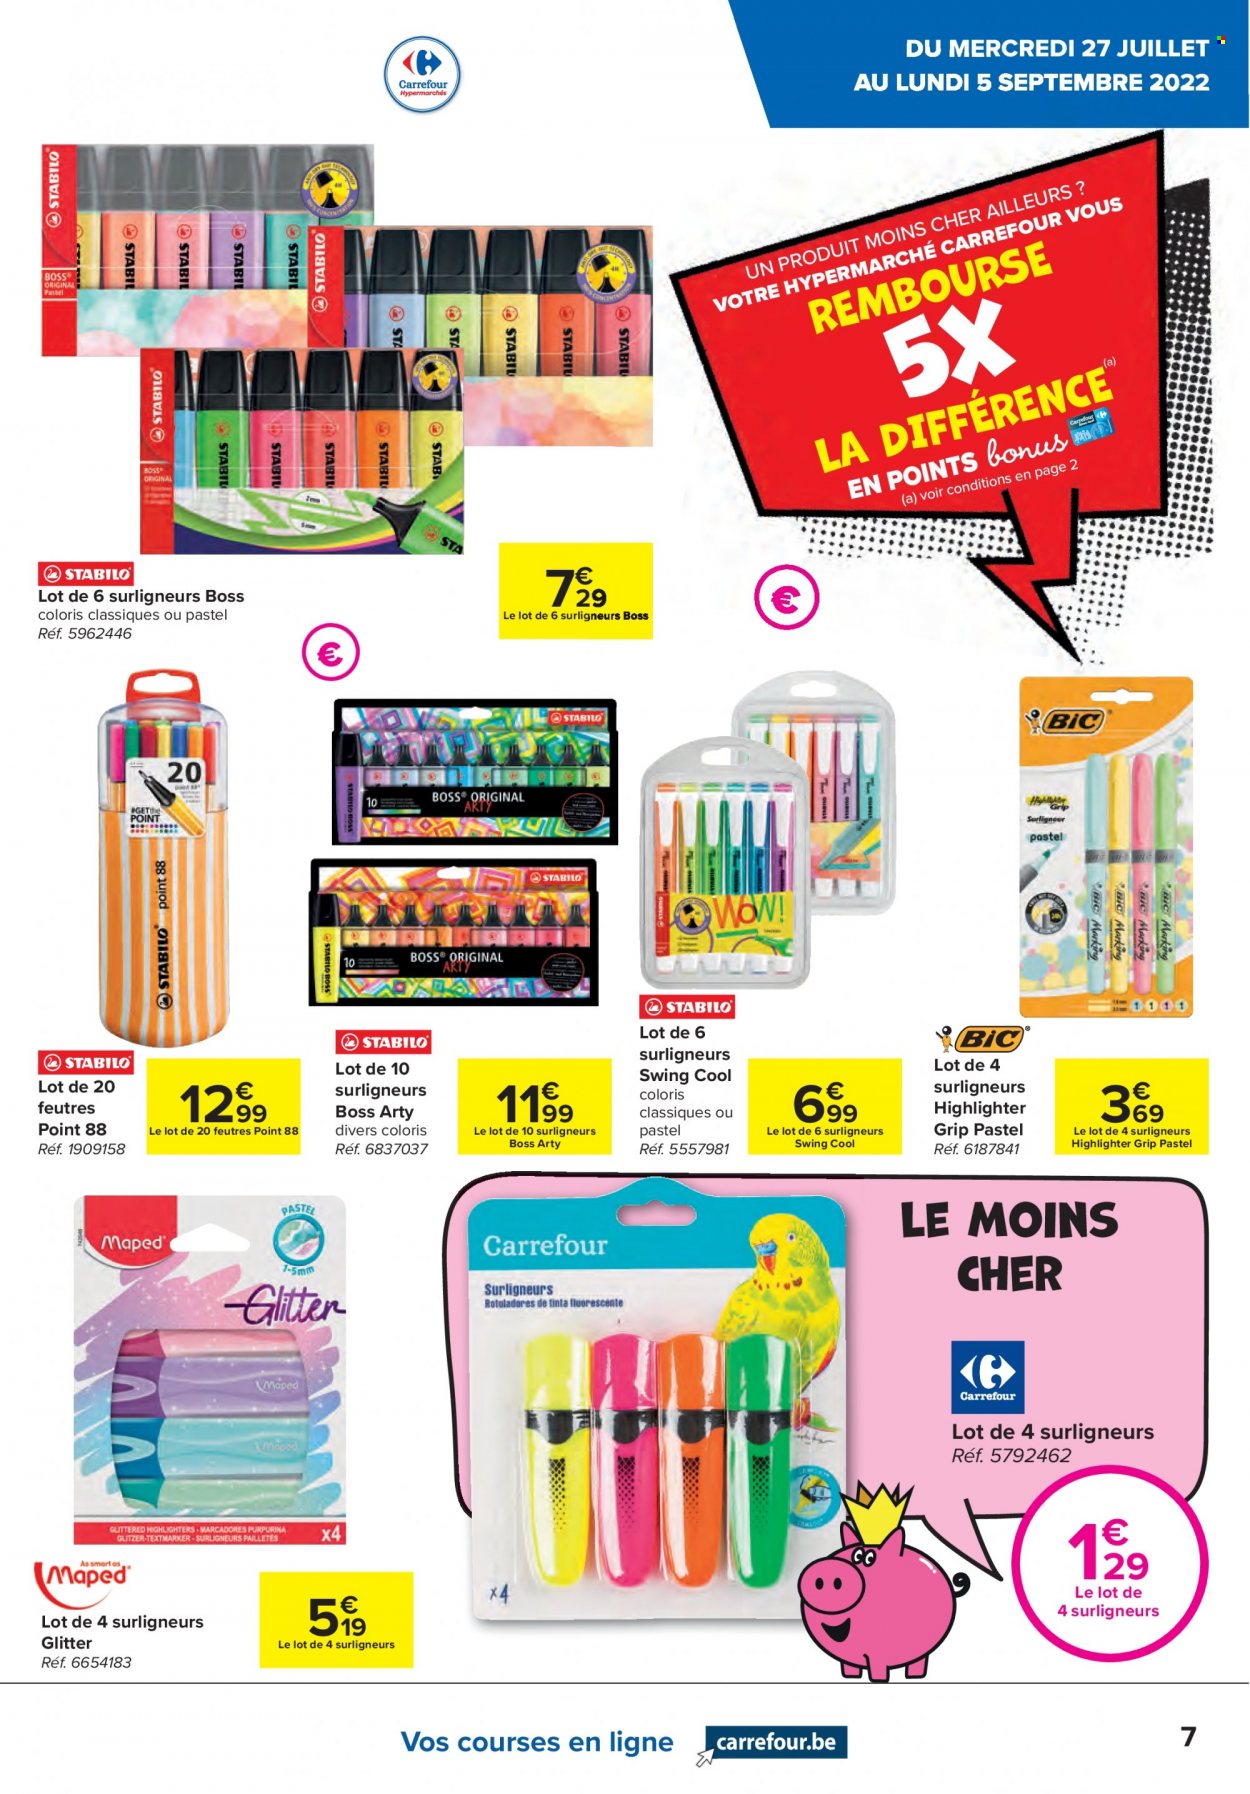 Catalogue Carrefour hypermarkt - 27.7.2022 - 5.9.2022. Page 7.